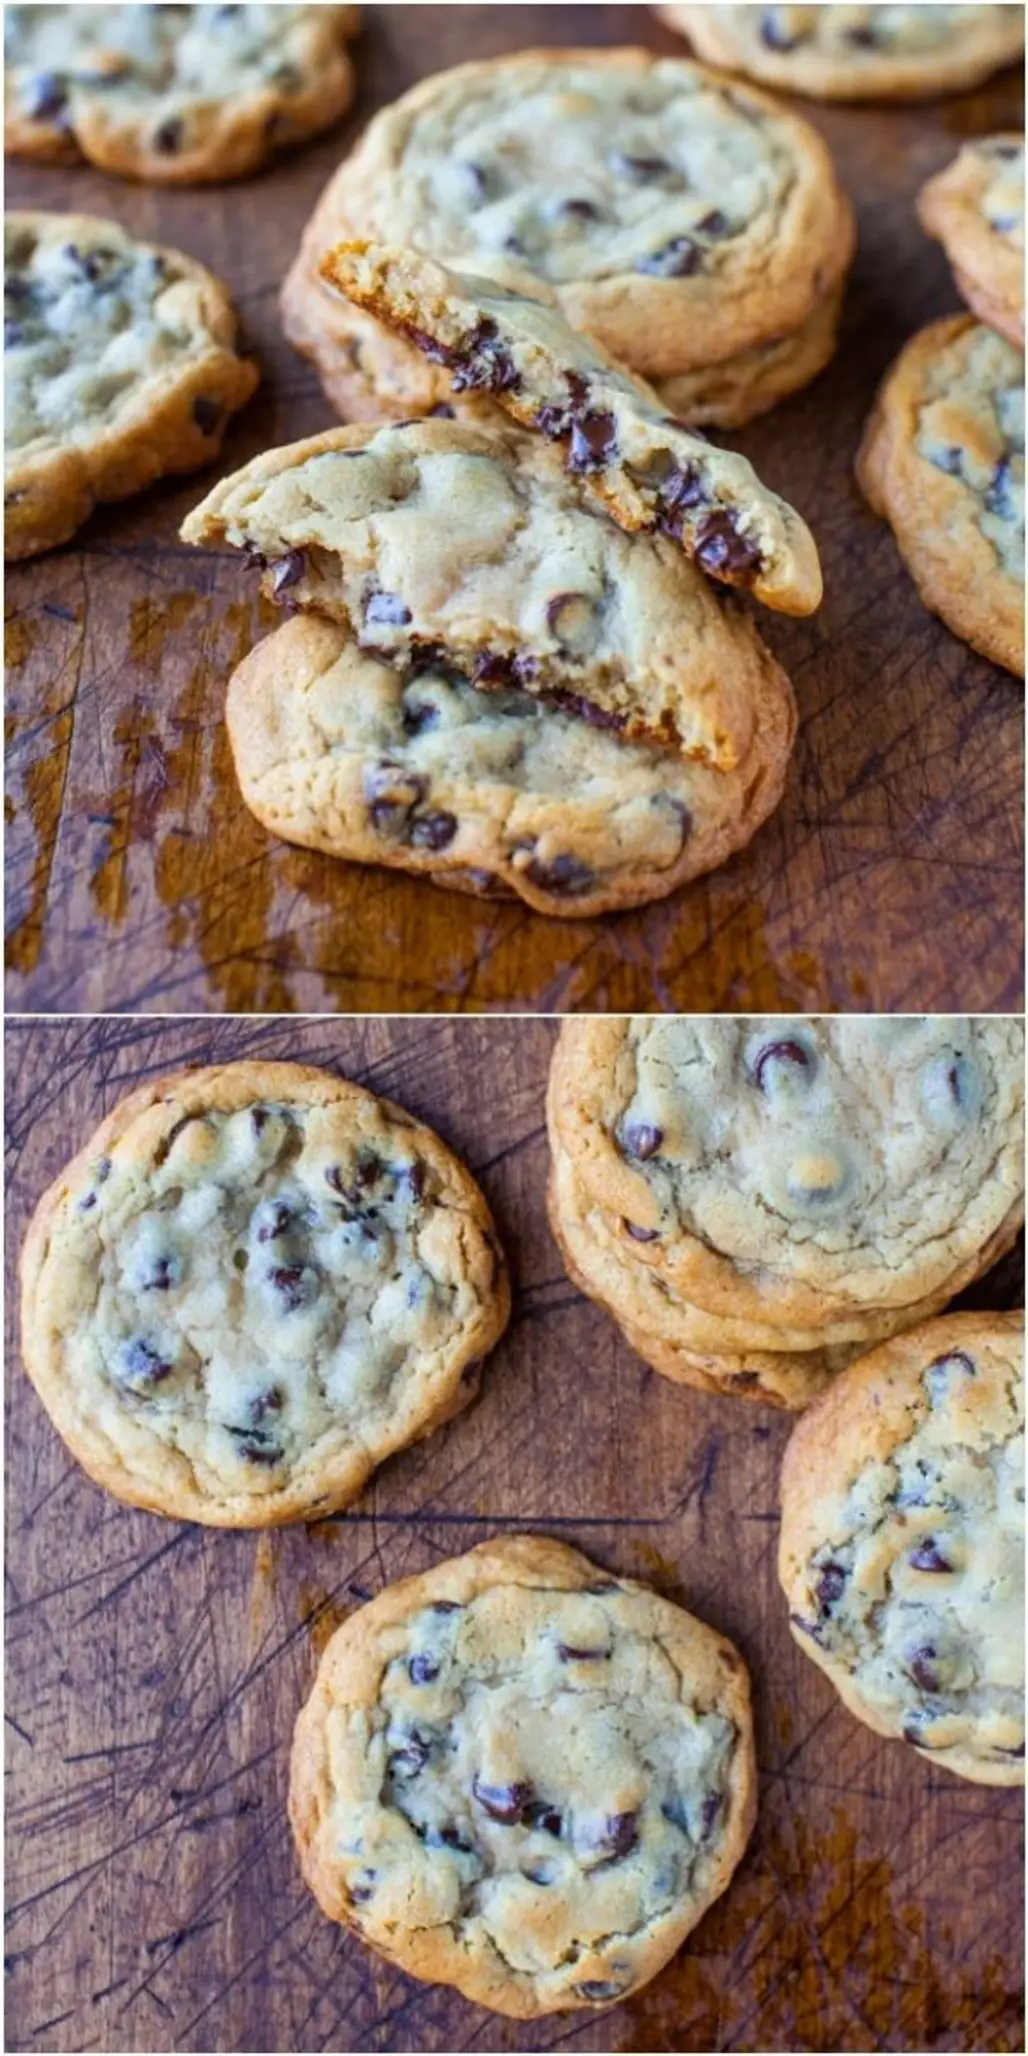 New York Times Chocolate Chips Cookies